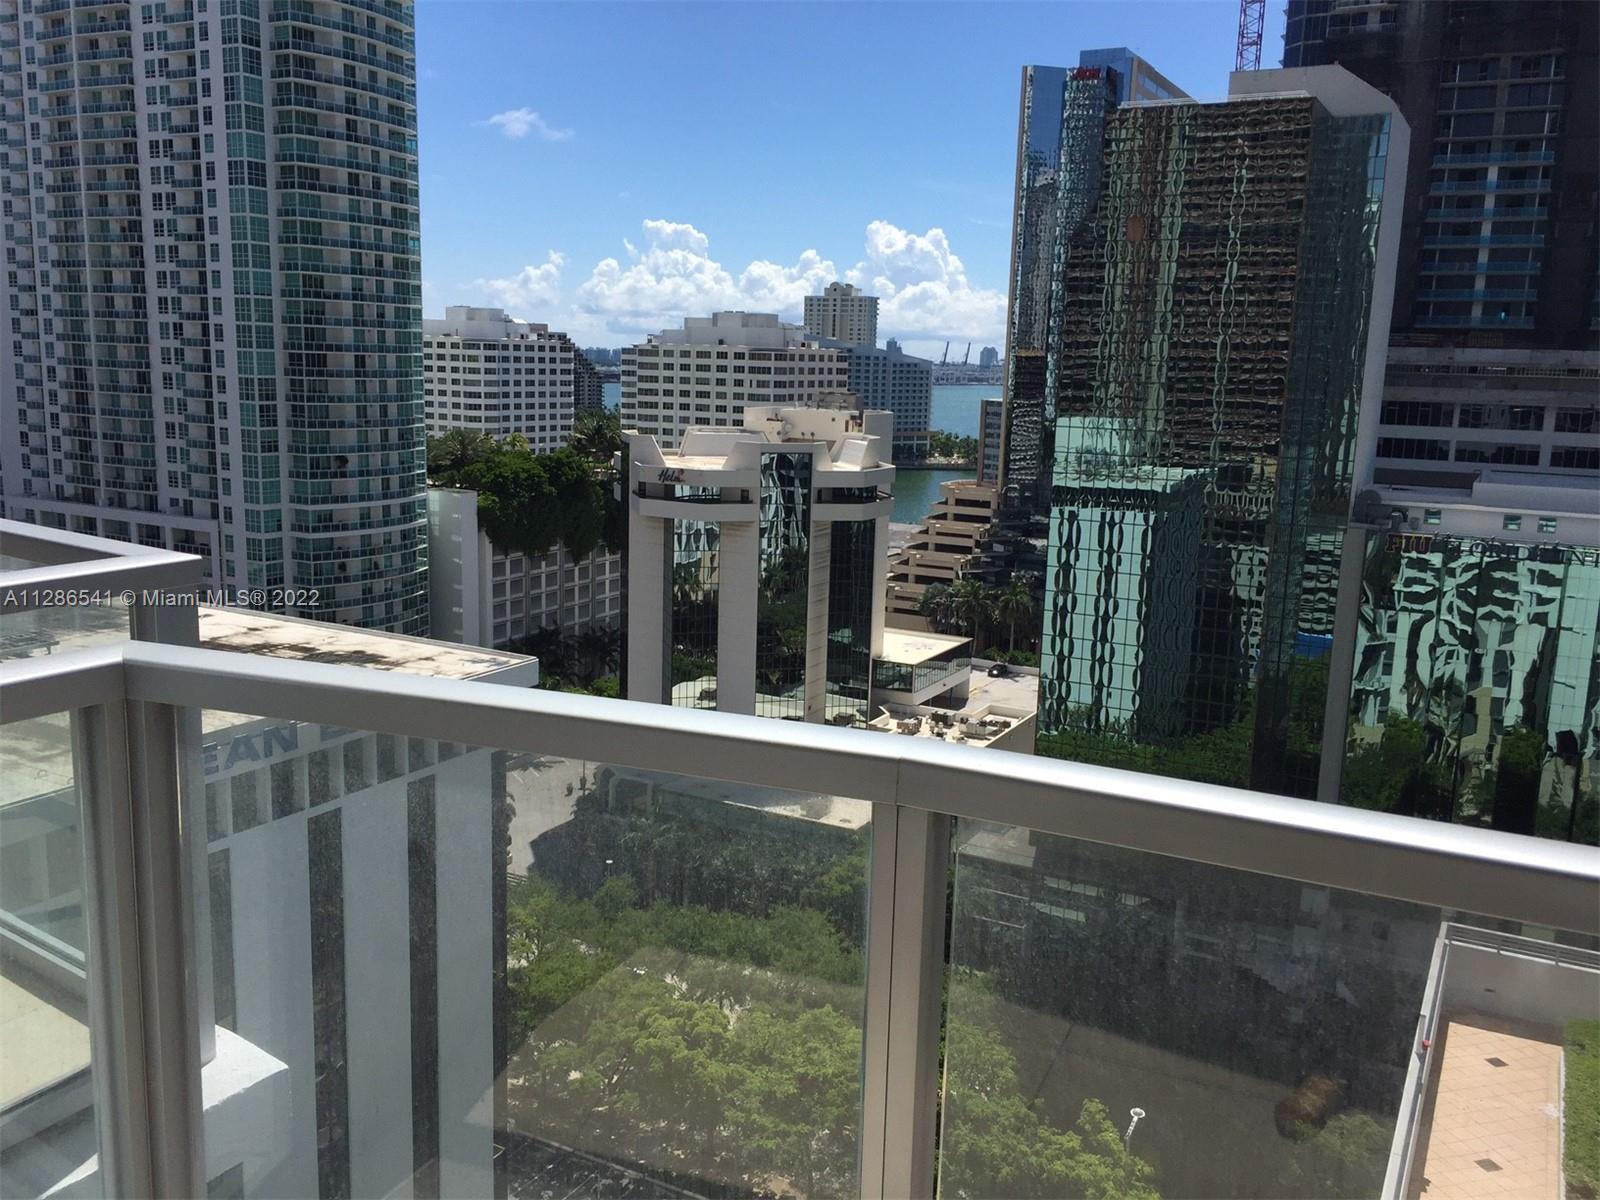 Great opportunity to own a studio in one of the most desirable buildings in Brickell. 1060 Brickell Condo offers first class amenities all within a walking distance to Mary Brickell Village, restaurants, Metro Rail, supermarkets and much more. 24 hr. front desk, security. Excellent management. A very good opportunity for investors seeking a high return on their investment. 5.2% Cap rate!